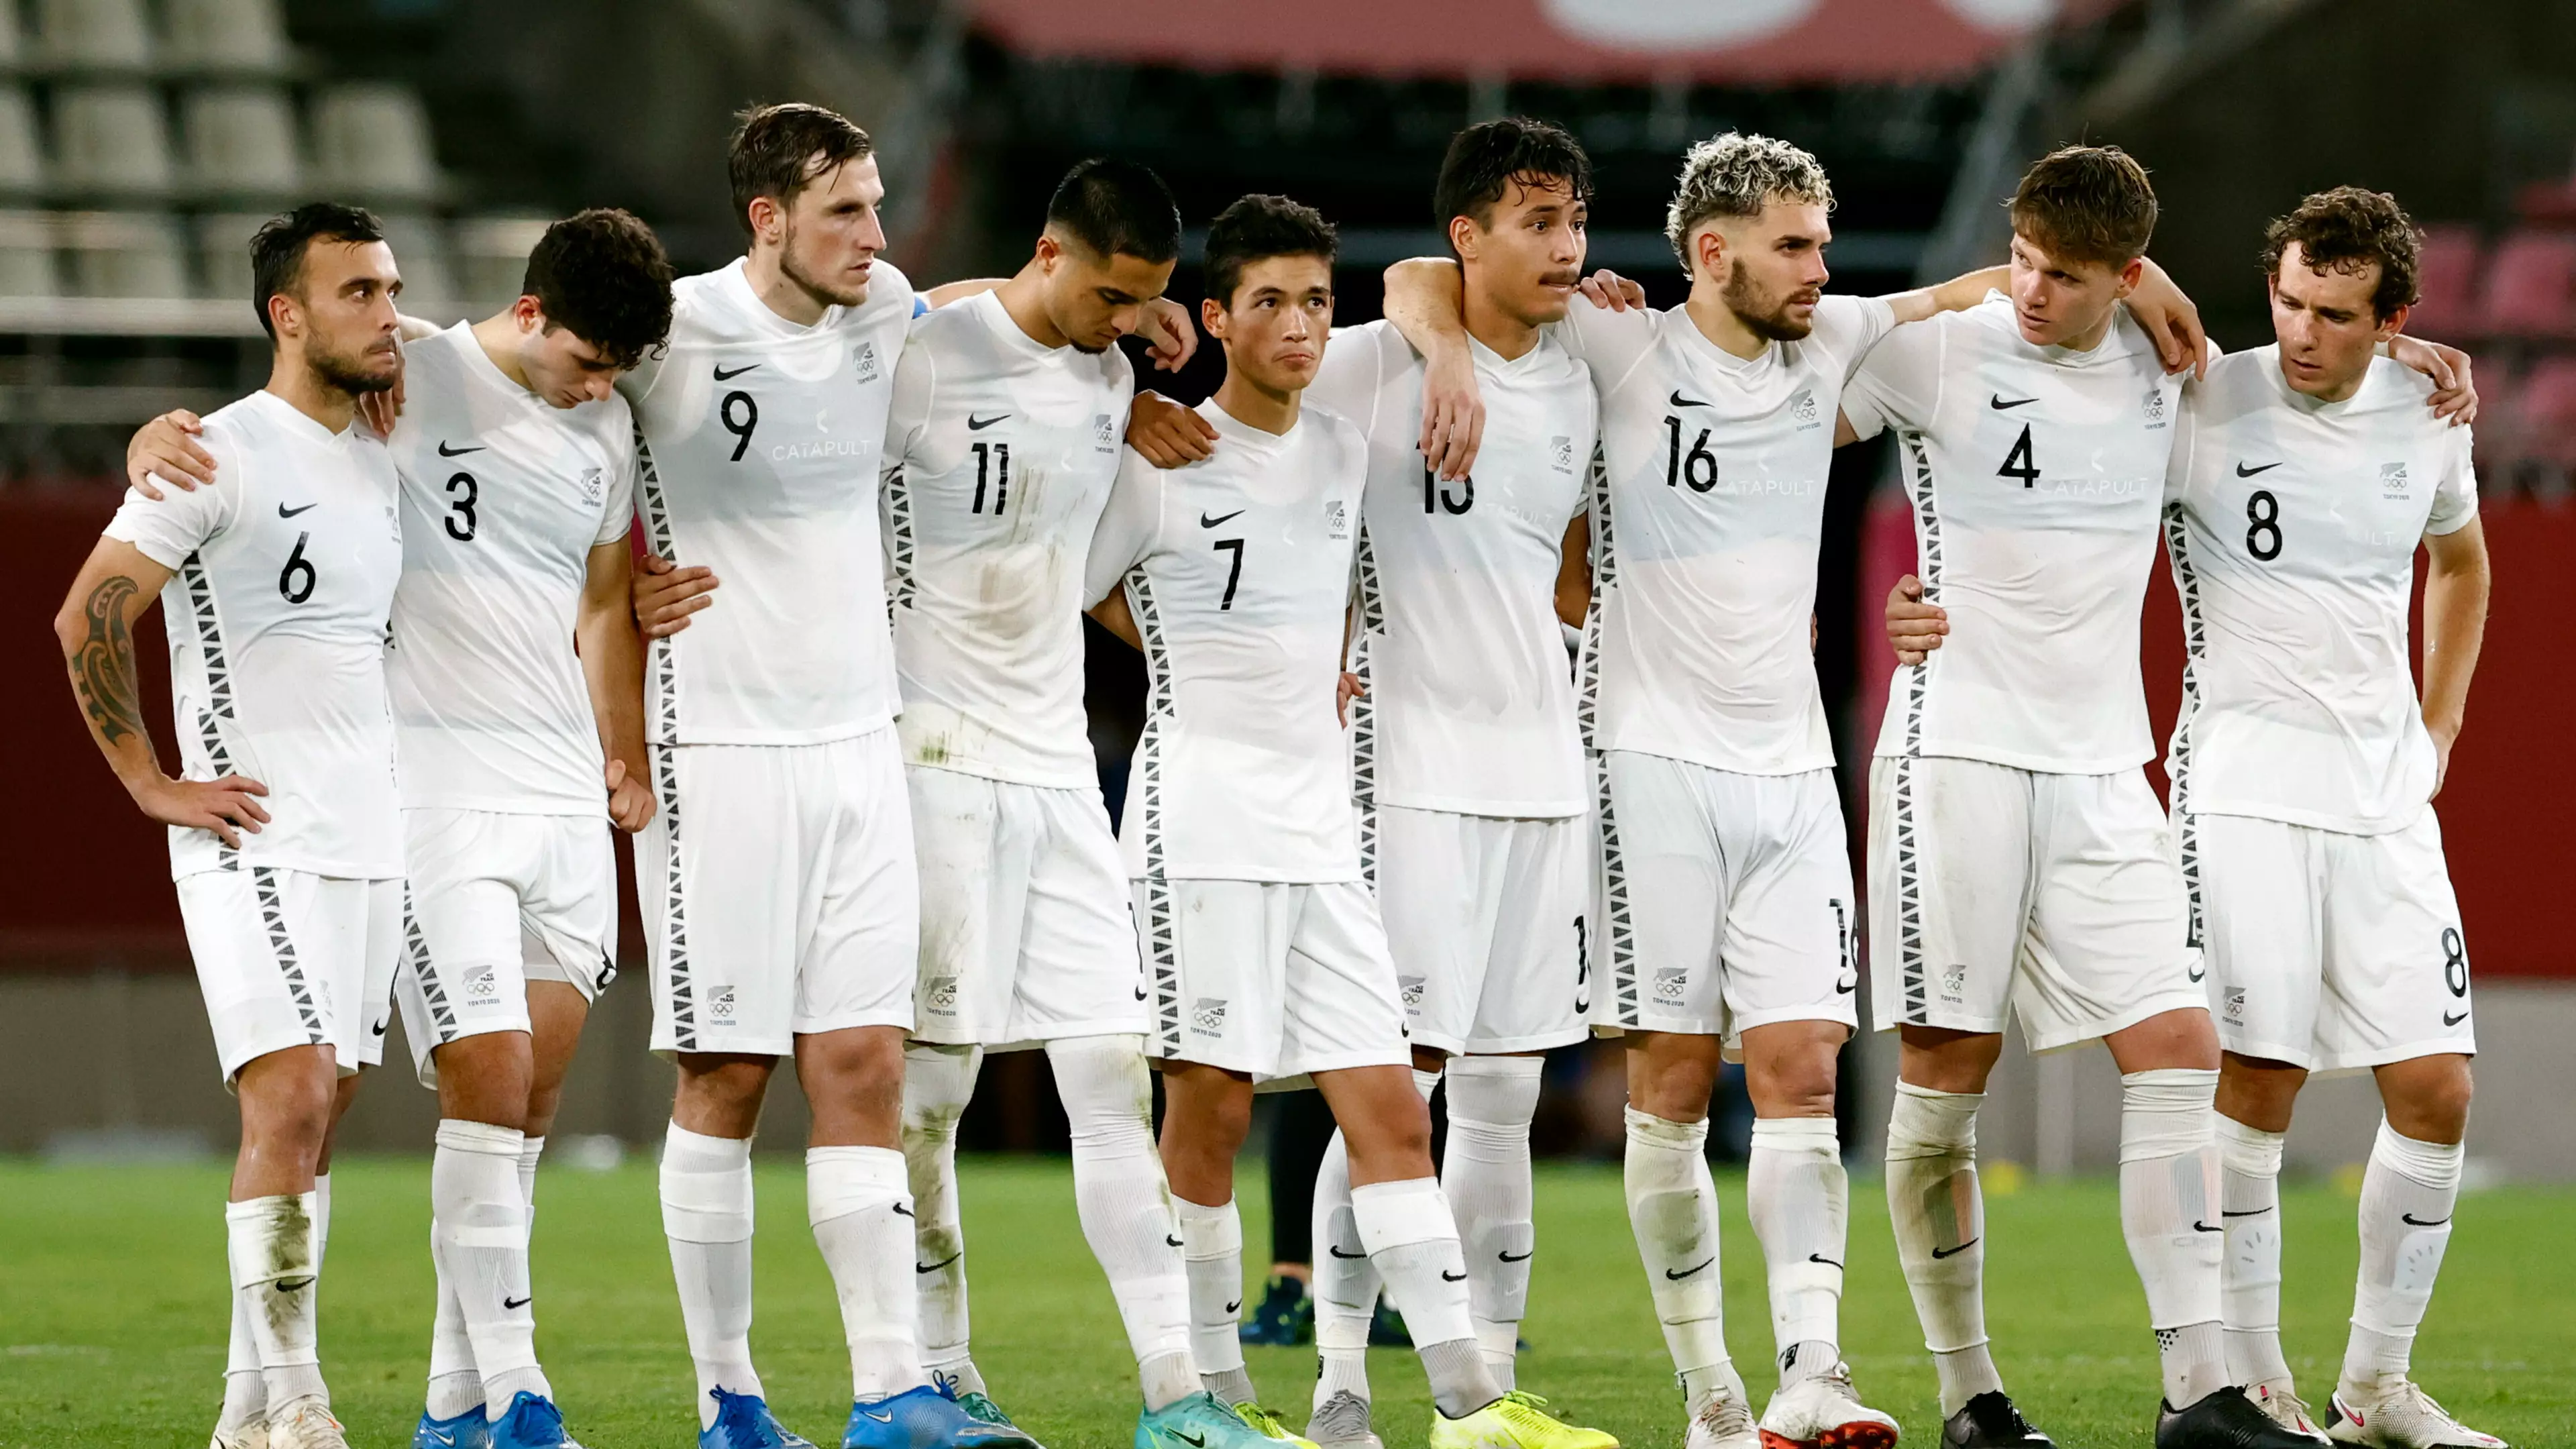 New Zealand National Football Team Might Change Their Nickname Due To Racism Fears